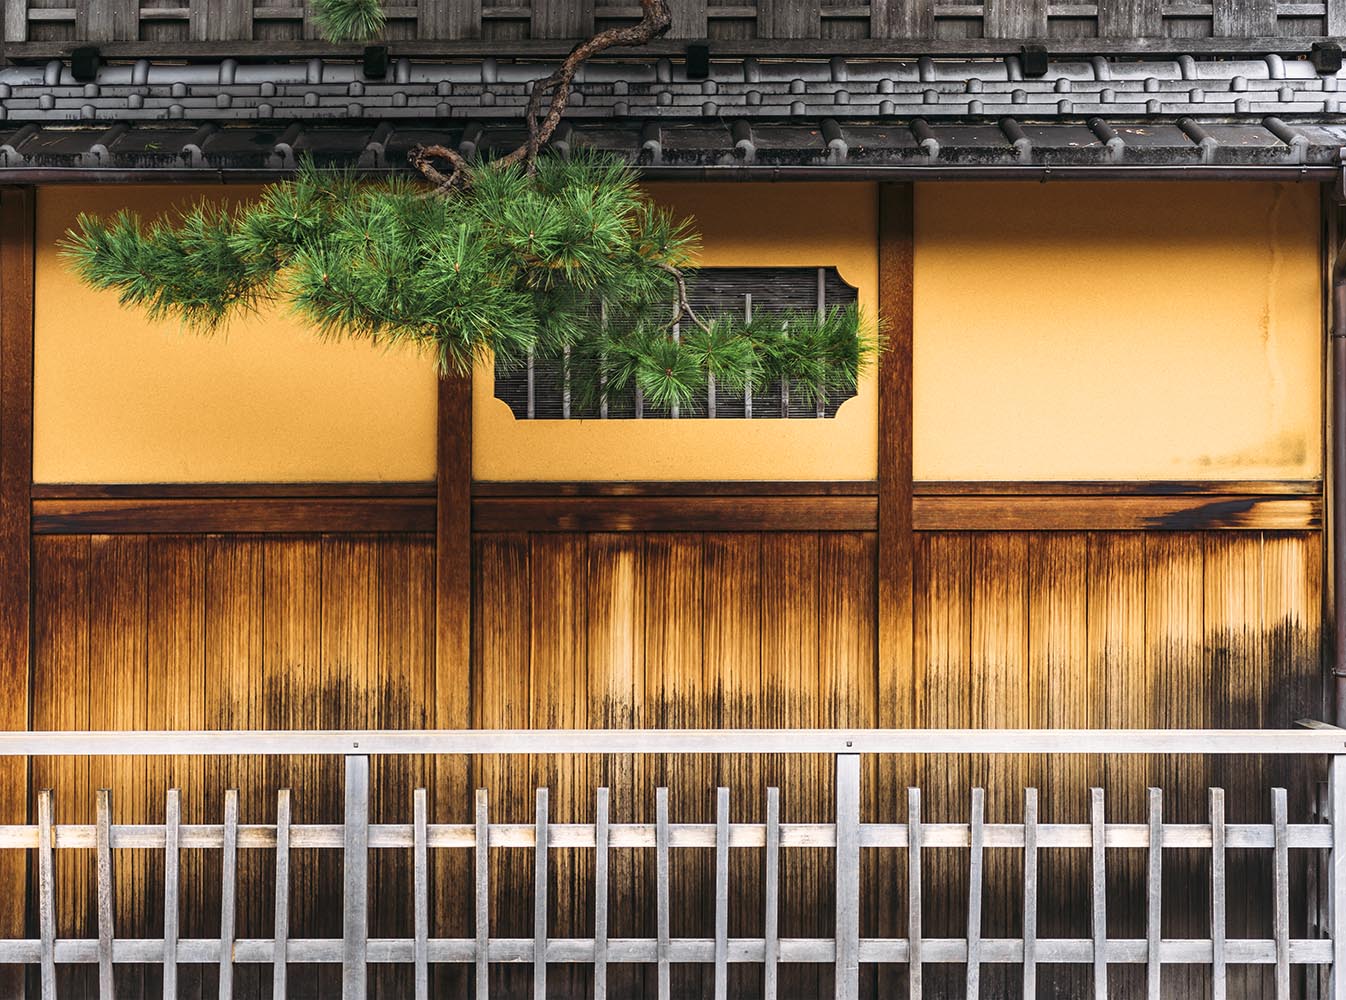 Wall of a traditional japanese house in Kyoto, Japan